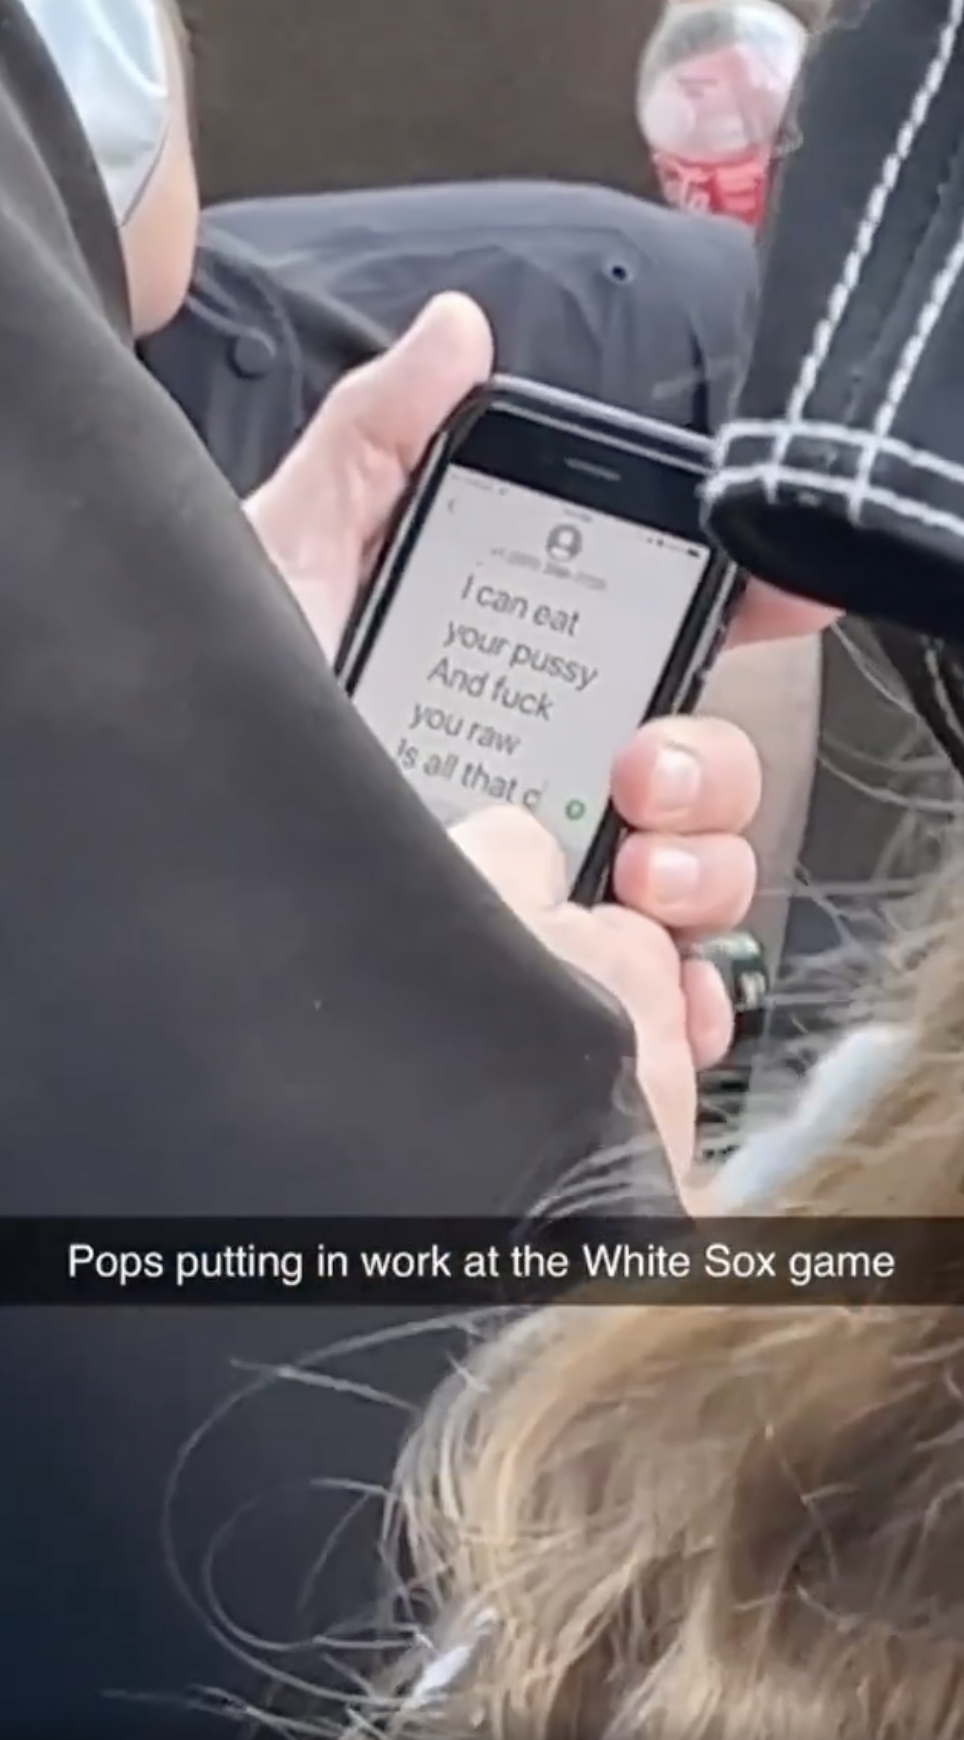 Man at White Sox game with his daughter seen texting a prostitute. 